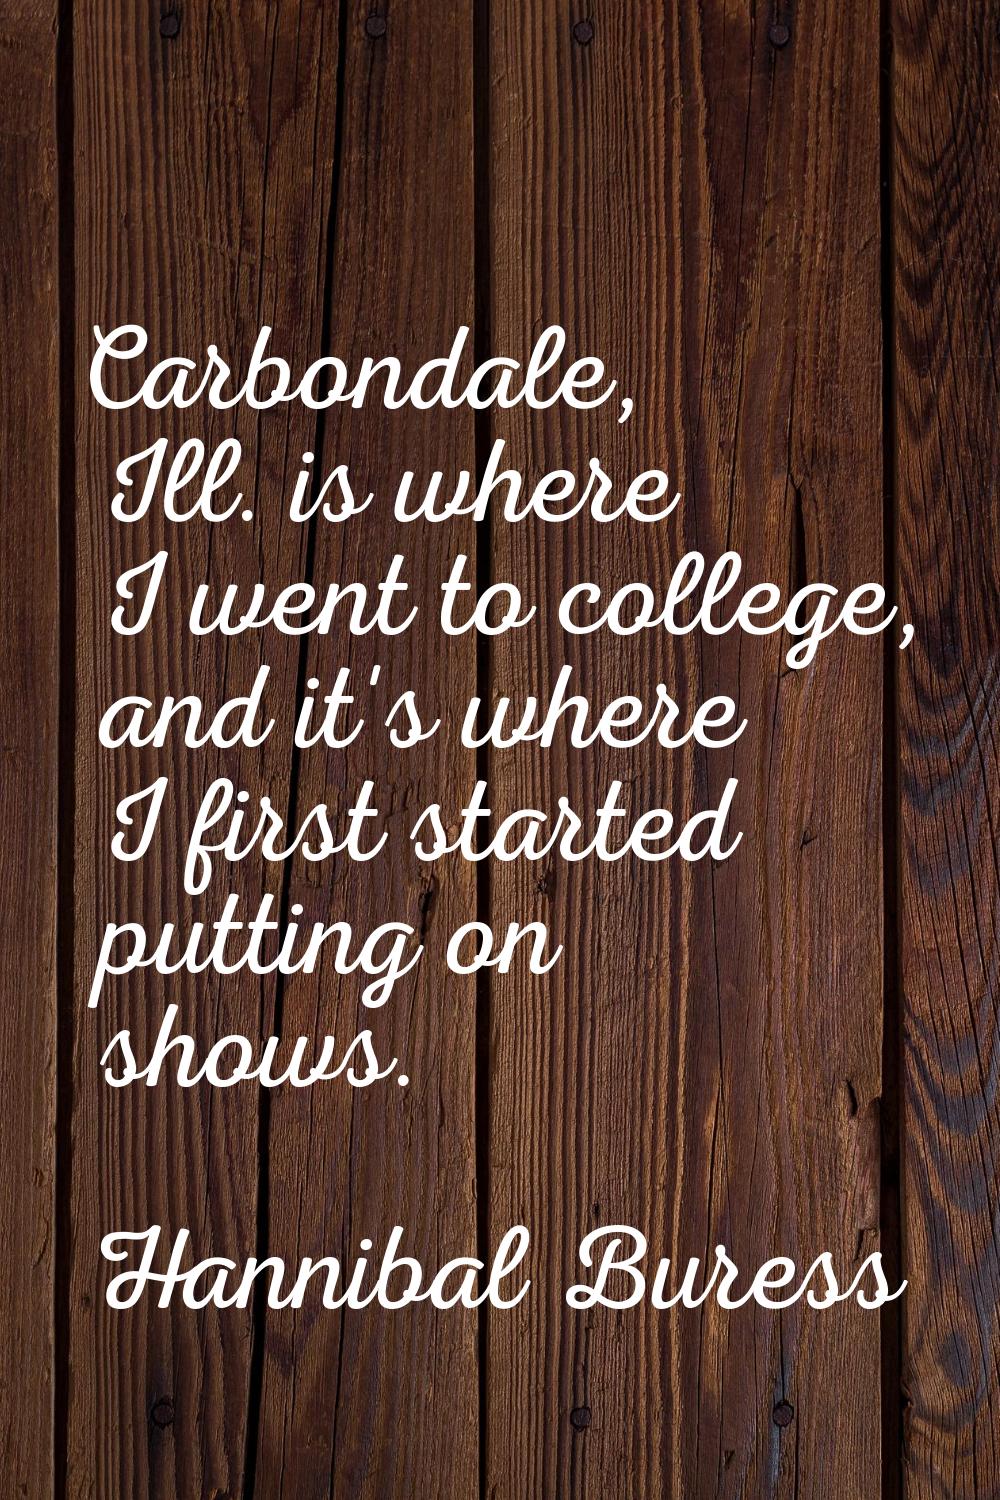 Carbondale, Ill. is where I went to college, and it's where I first started putting on shows.